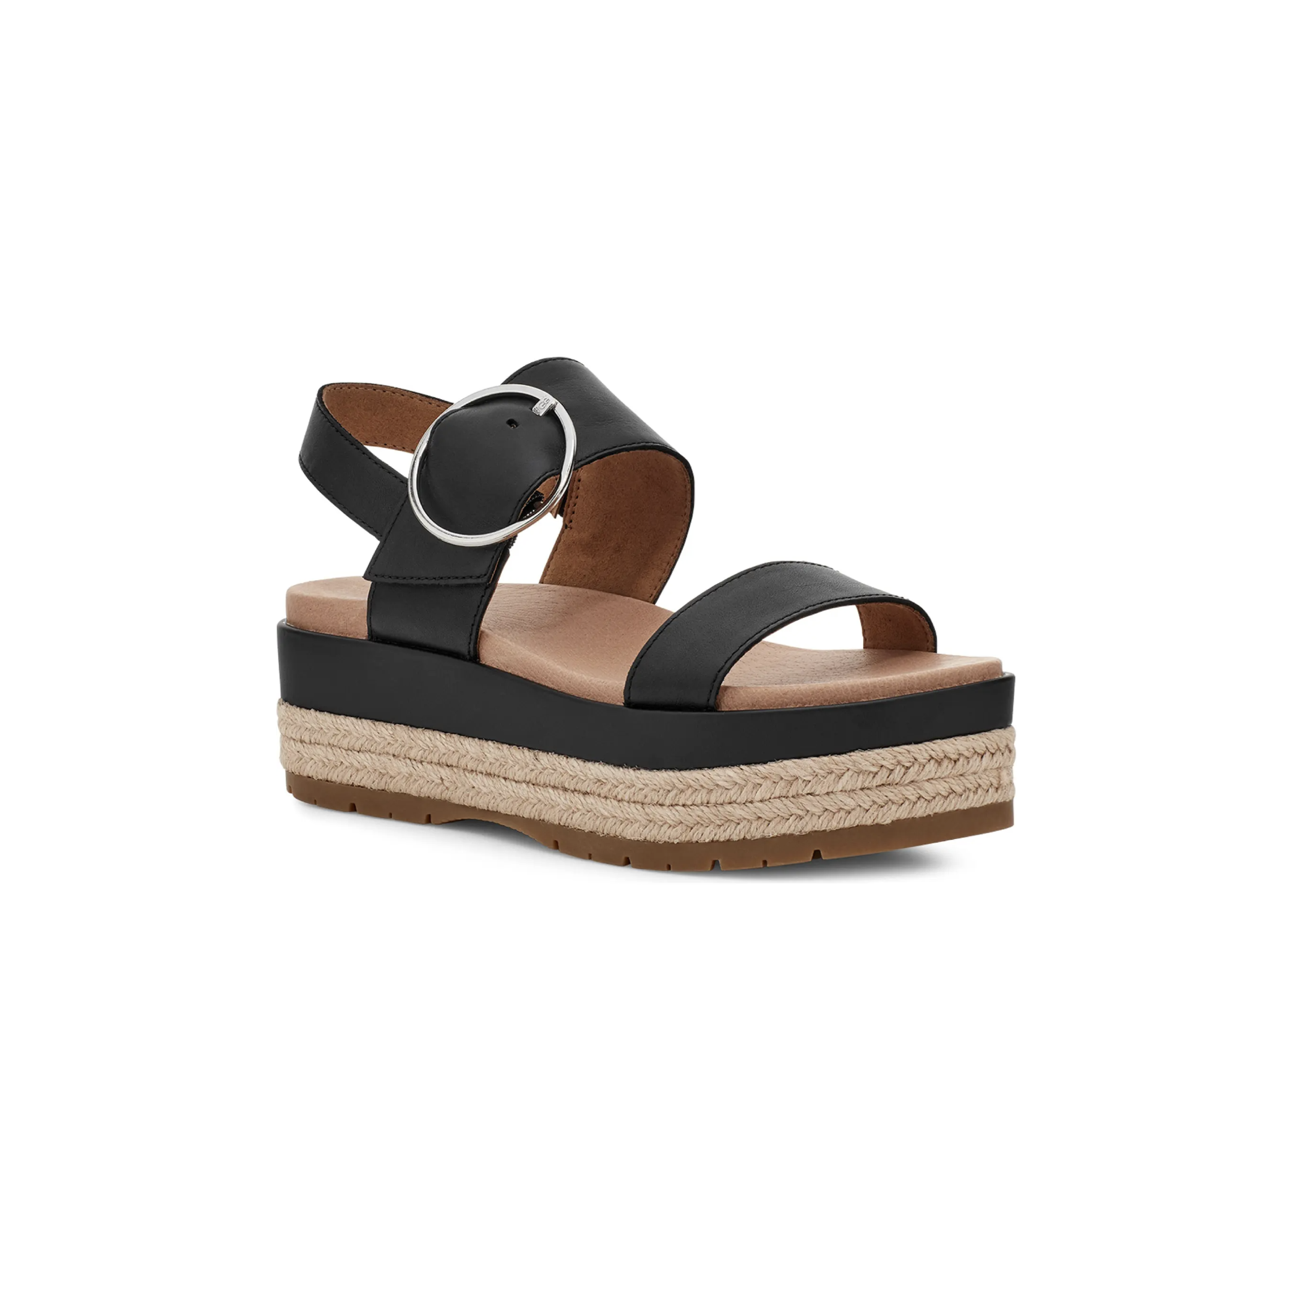 most comfortable sandals for women